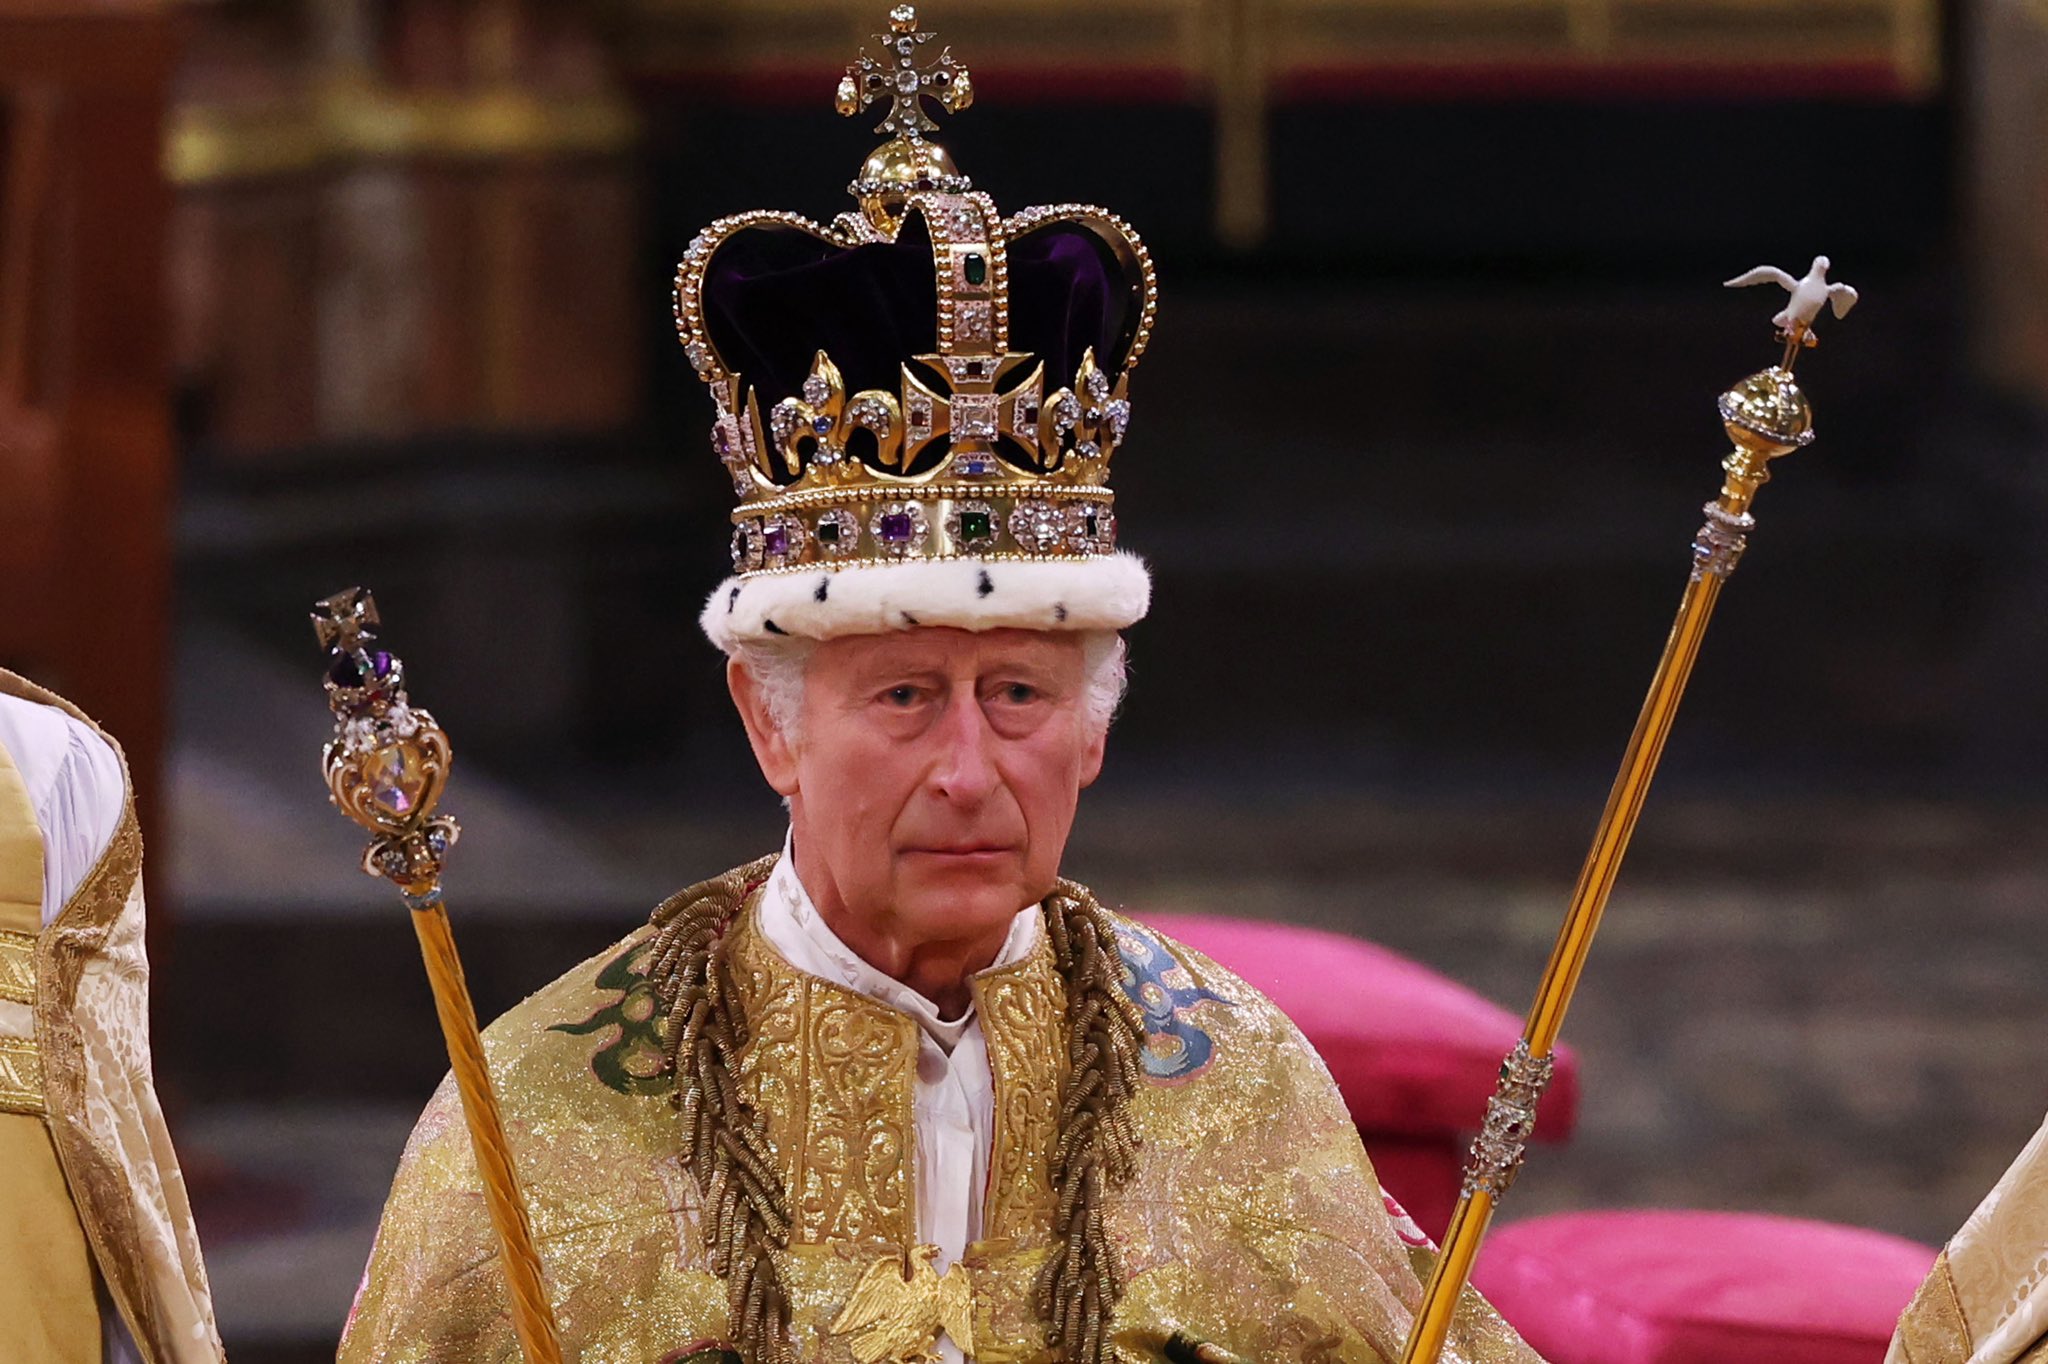 PICTORIAL: The historic moment King Charles III was crowned in London, England